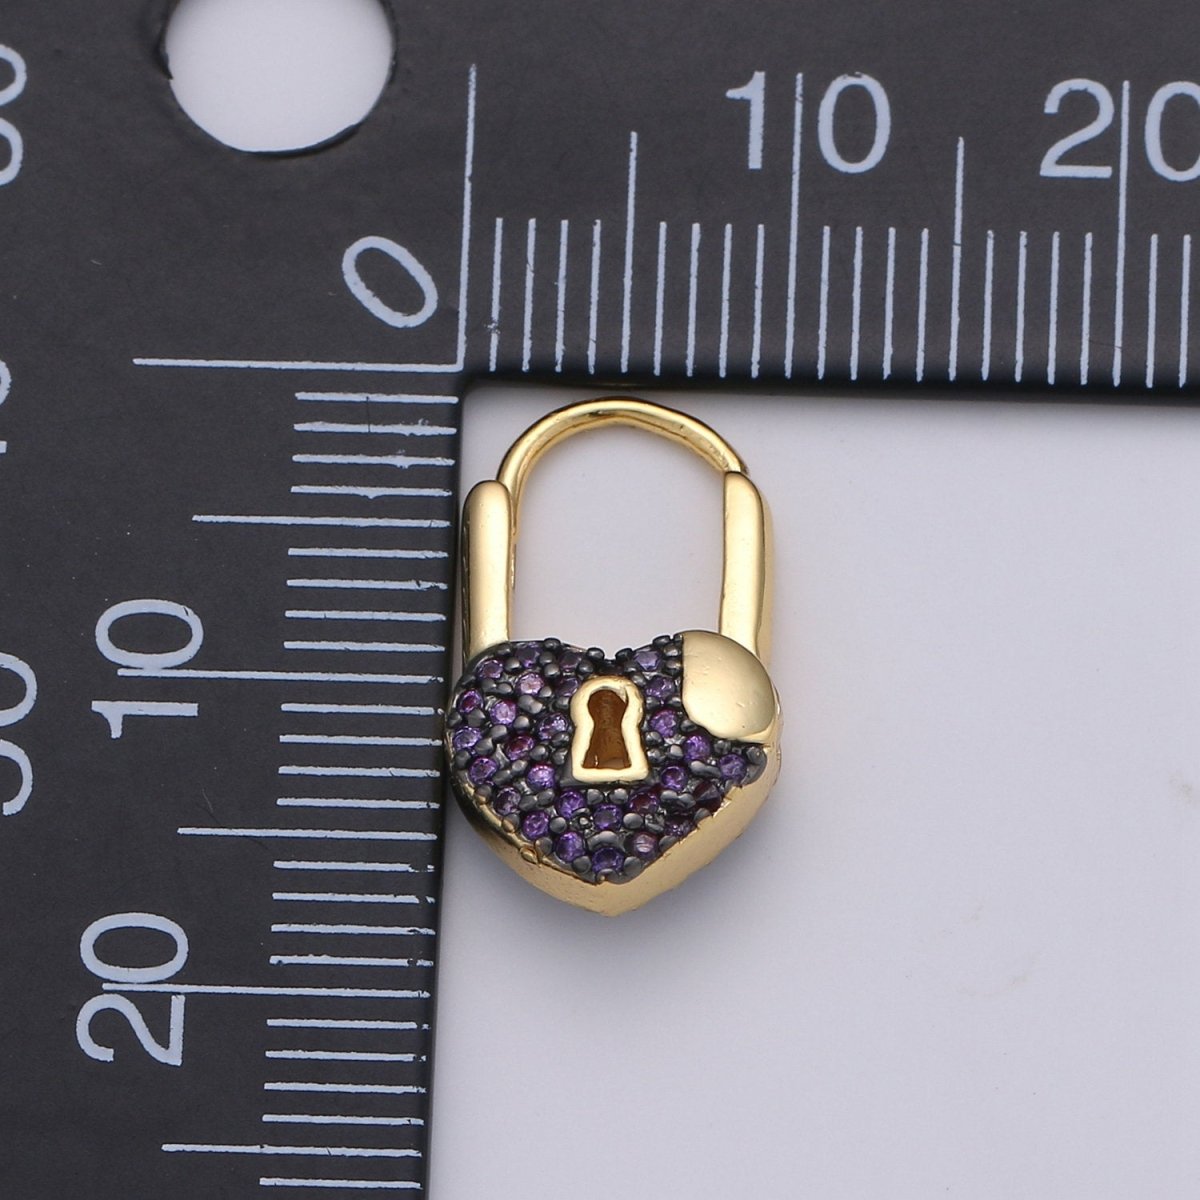 Gold earrings with Cz padlock charm, Heart Lock Charm Gold Mini Hoops Micro Pave Czl Hoops Minimalist and everyday use hoops K-627 - K-632 - DLUXCA